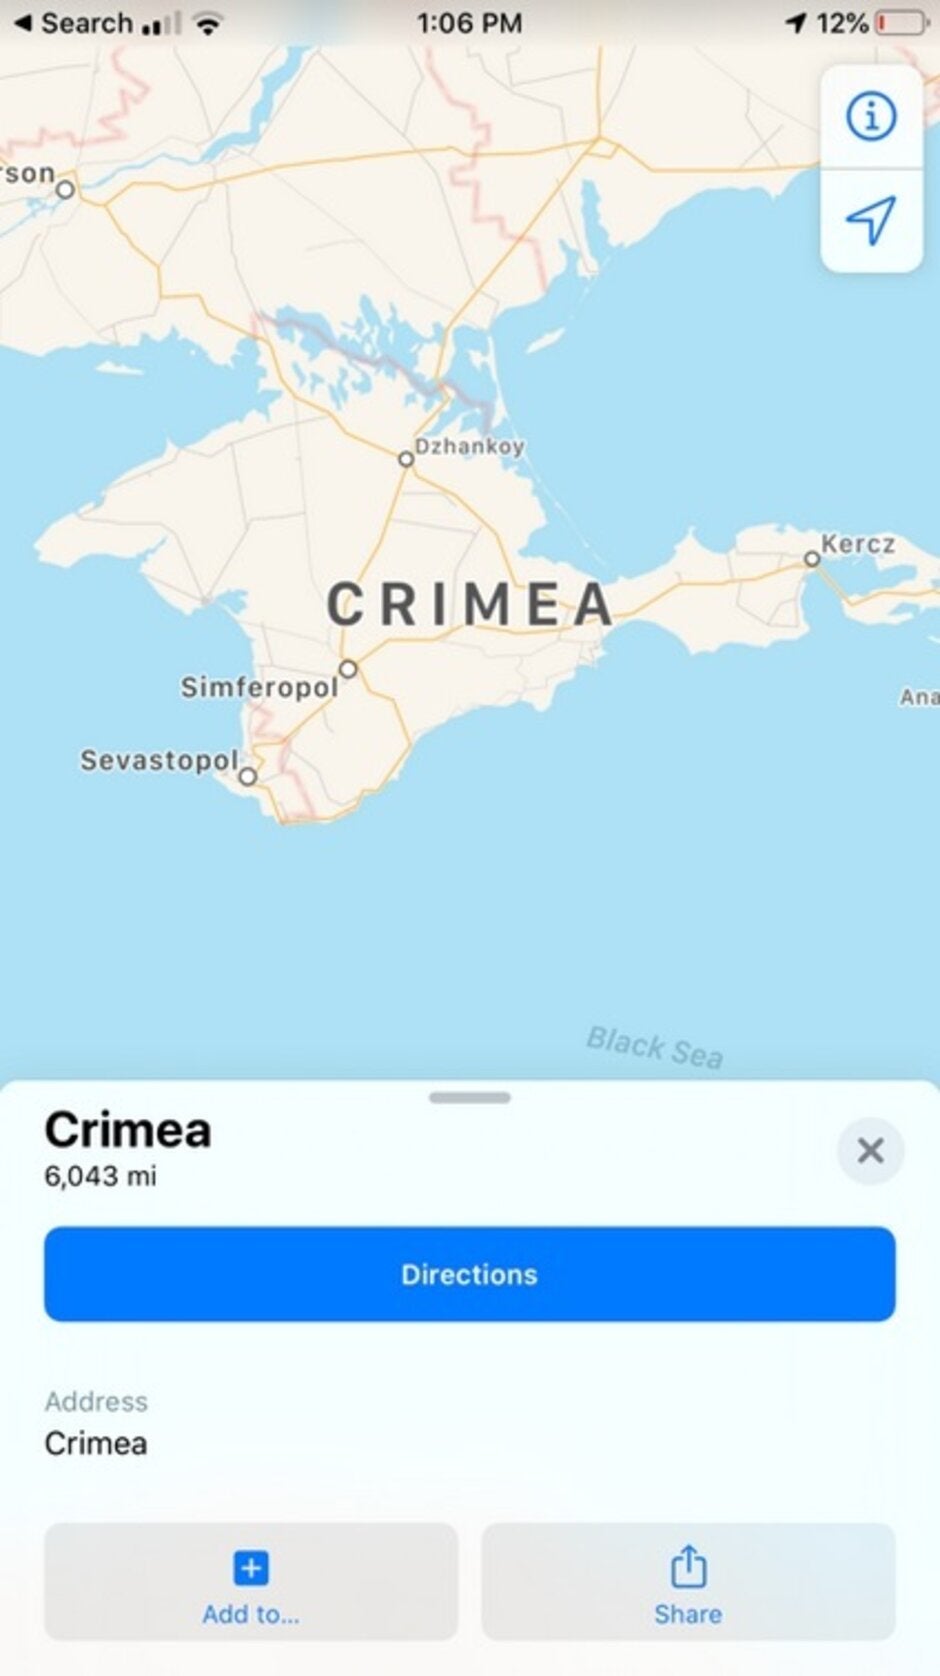 Crimea on Apple Maps in the U.S. - Apple will review its policies after siding with Russia on Crimea